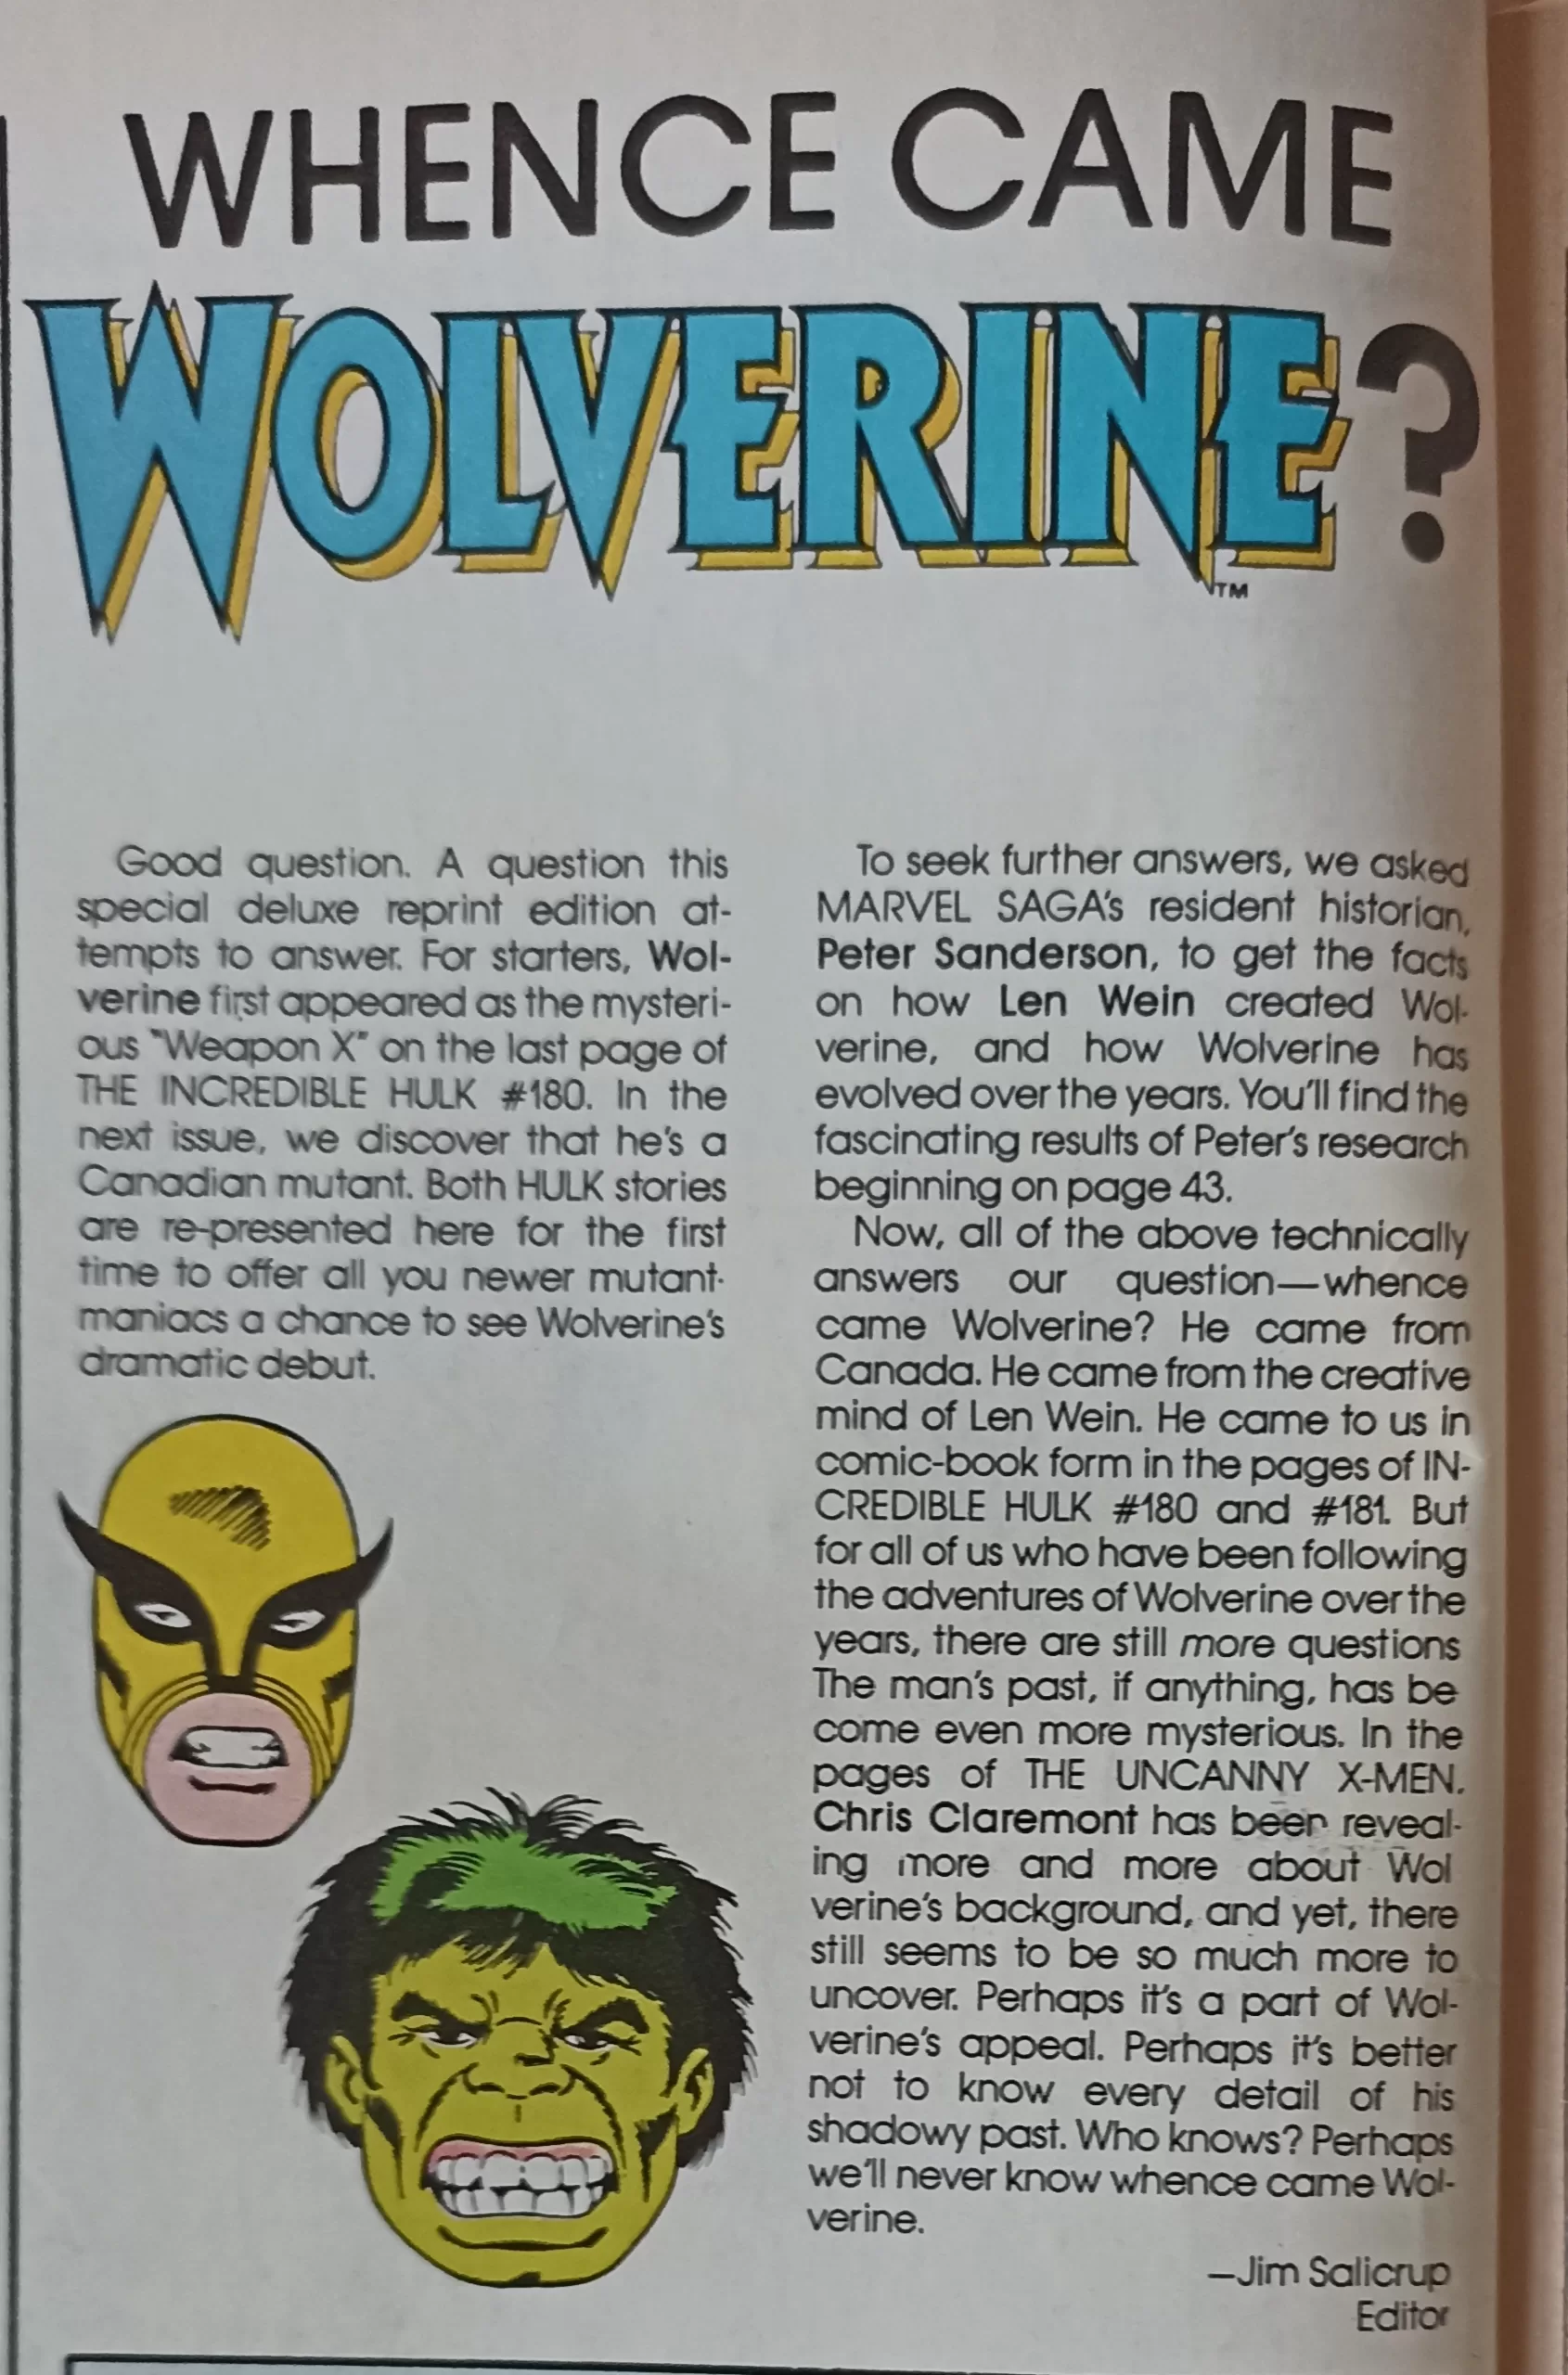 Wolverine's first appearance